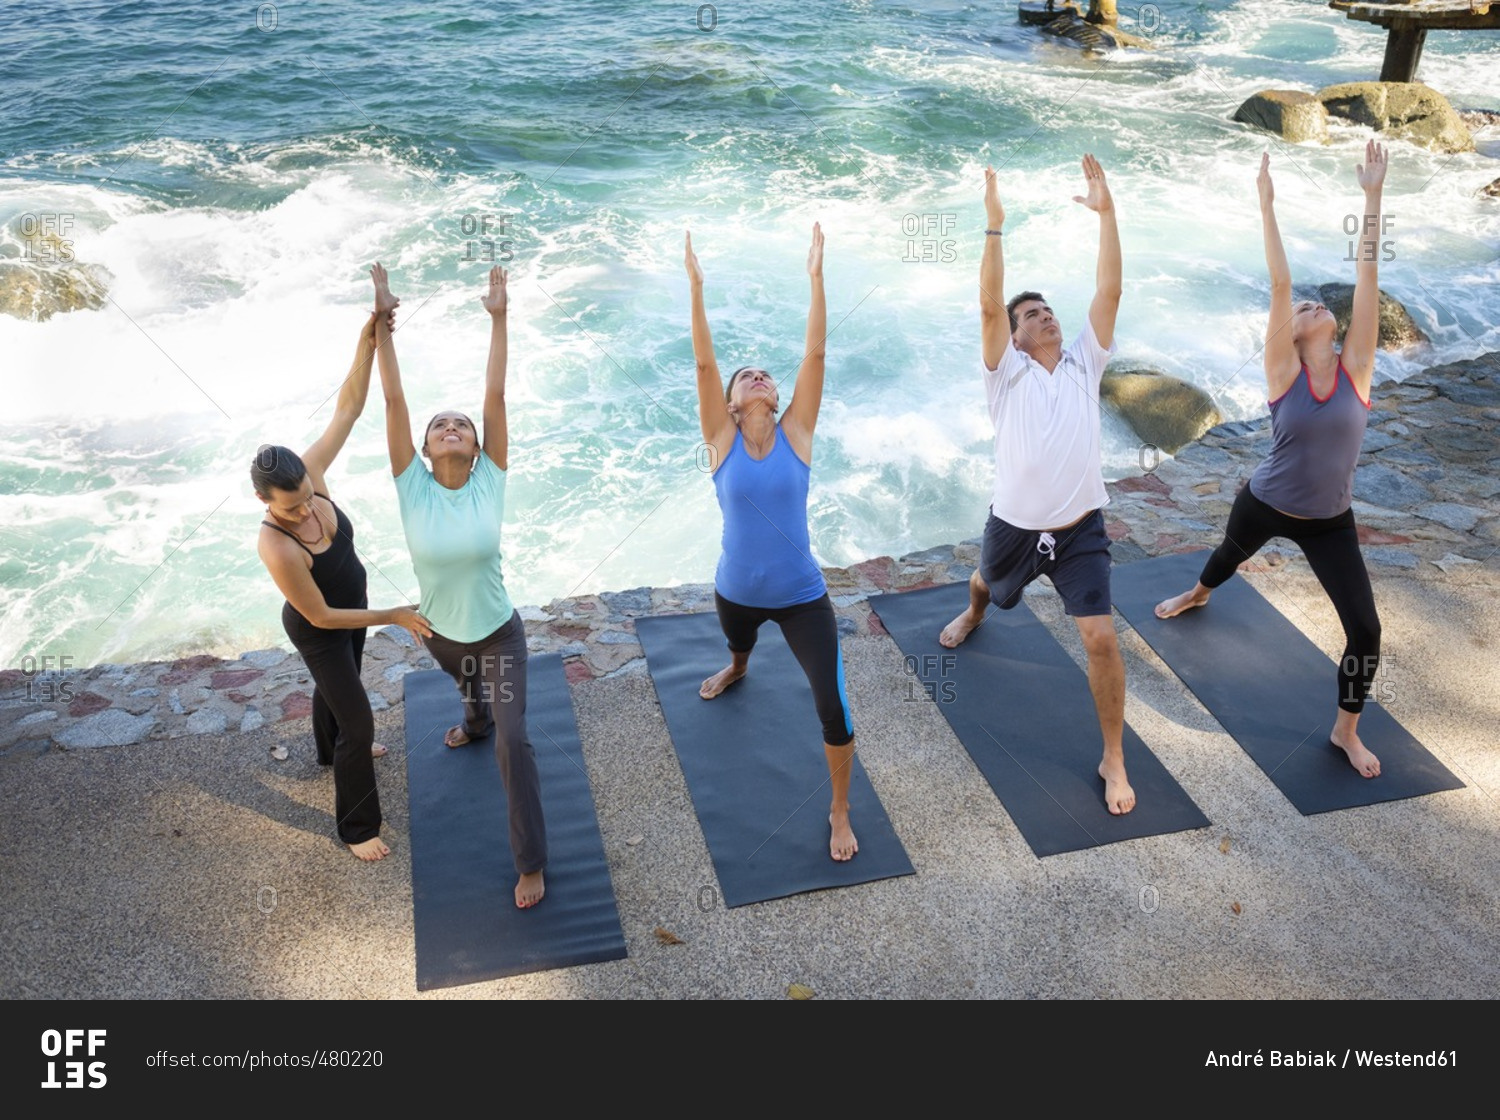 Instructor helping group doing yoga at ocean front